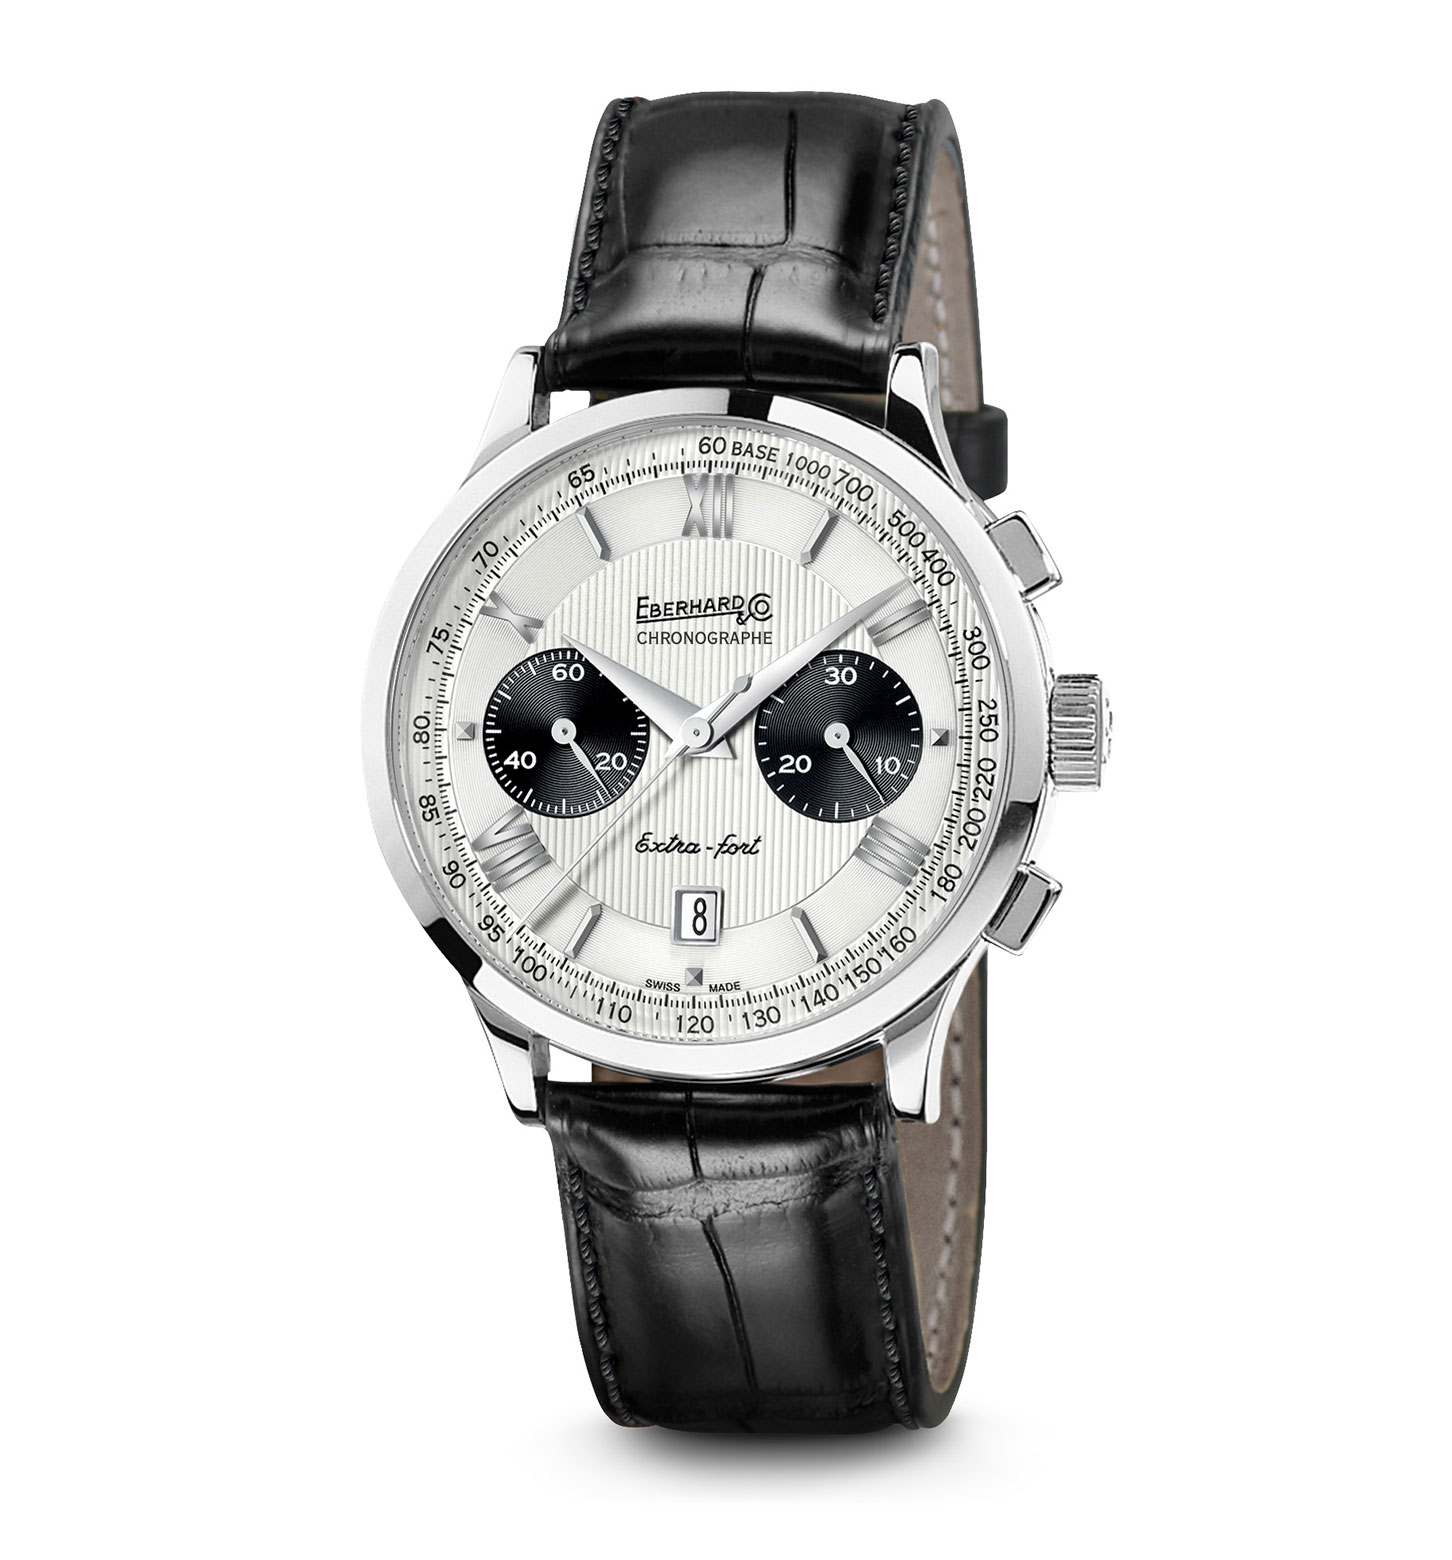 Eberhard Extra-fort with siilver dial and black counters